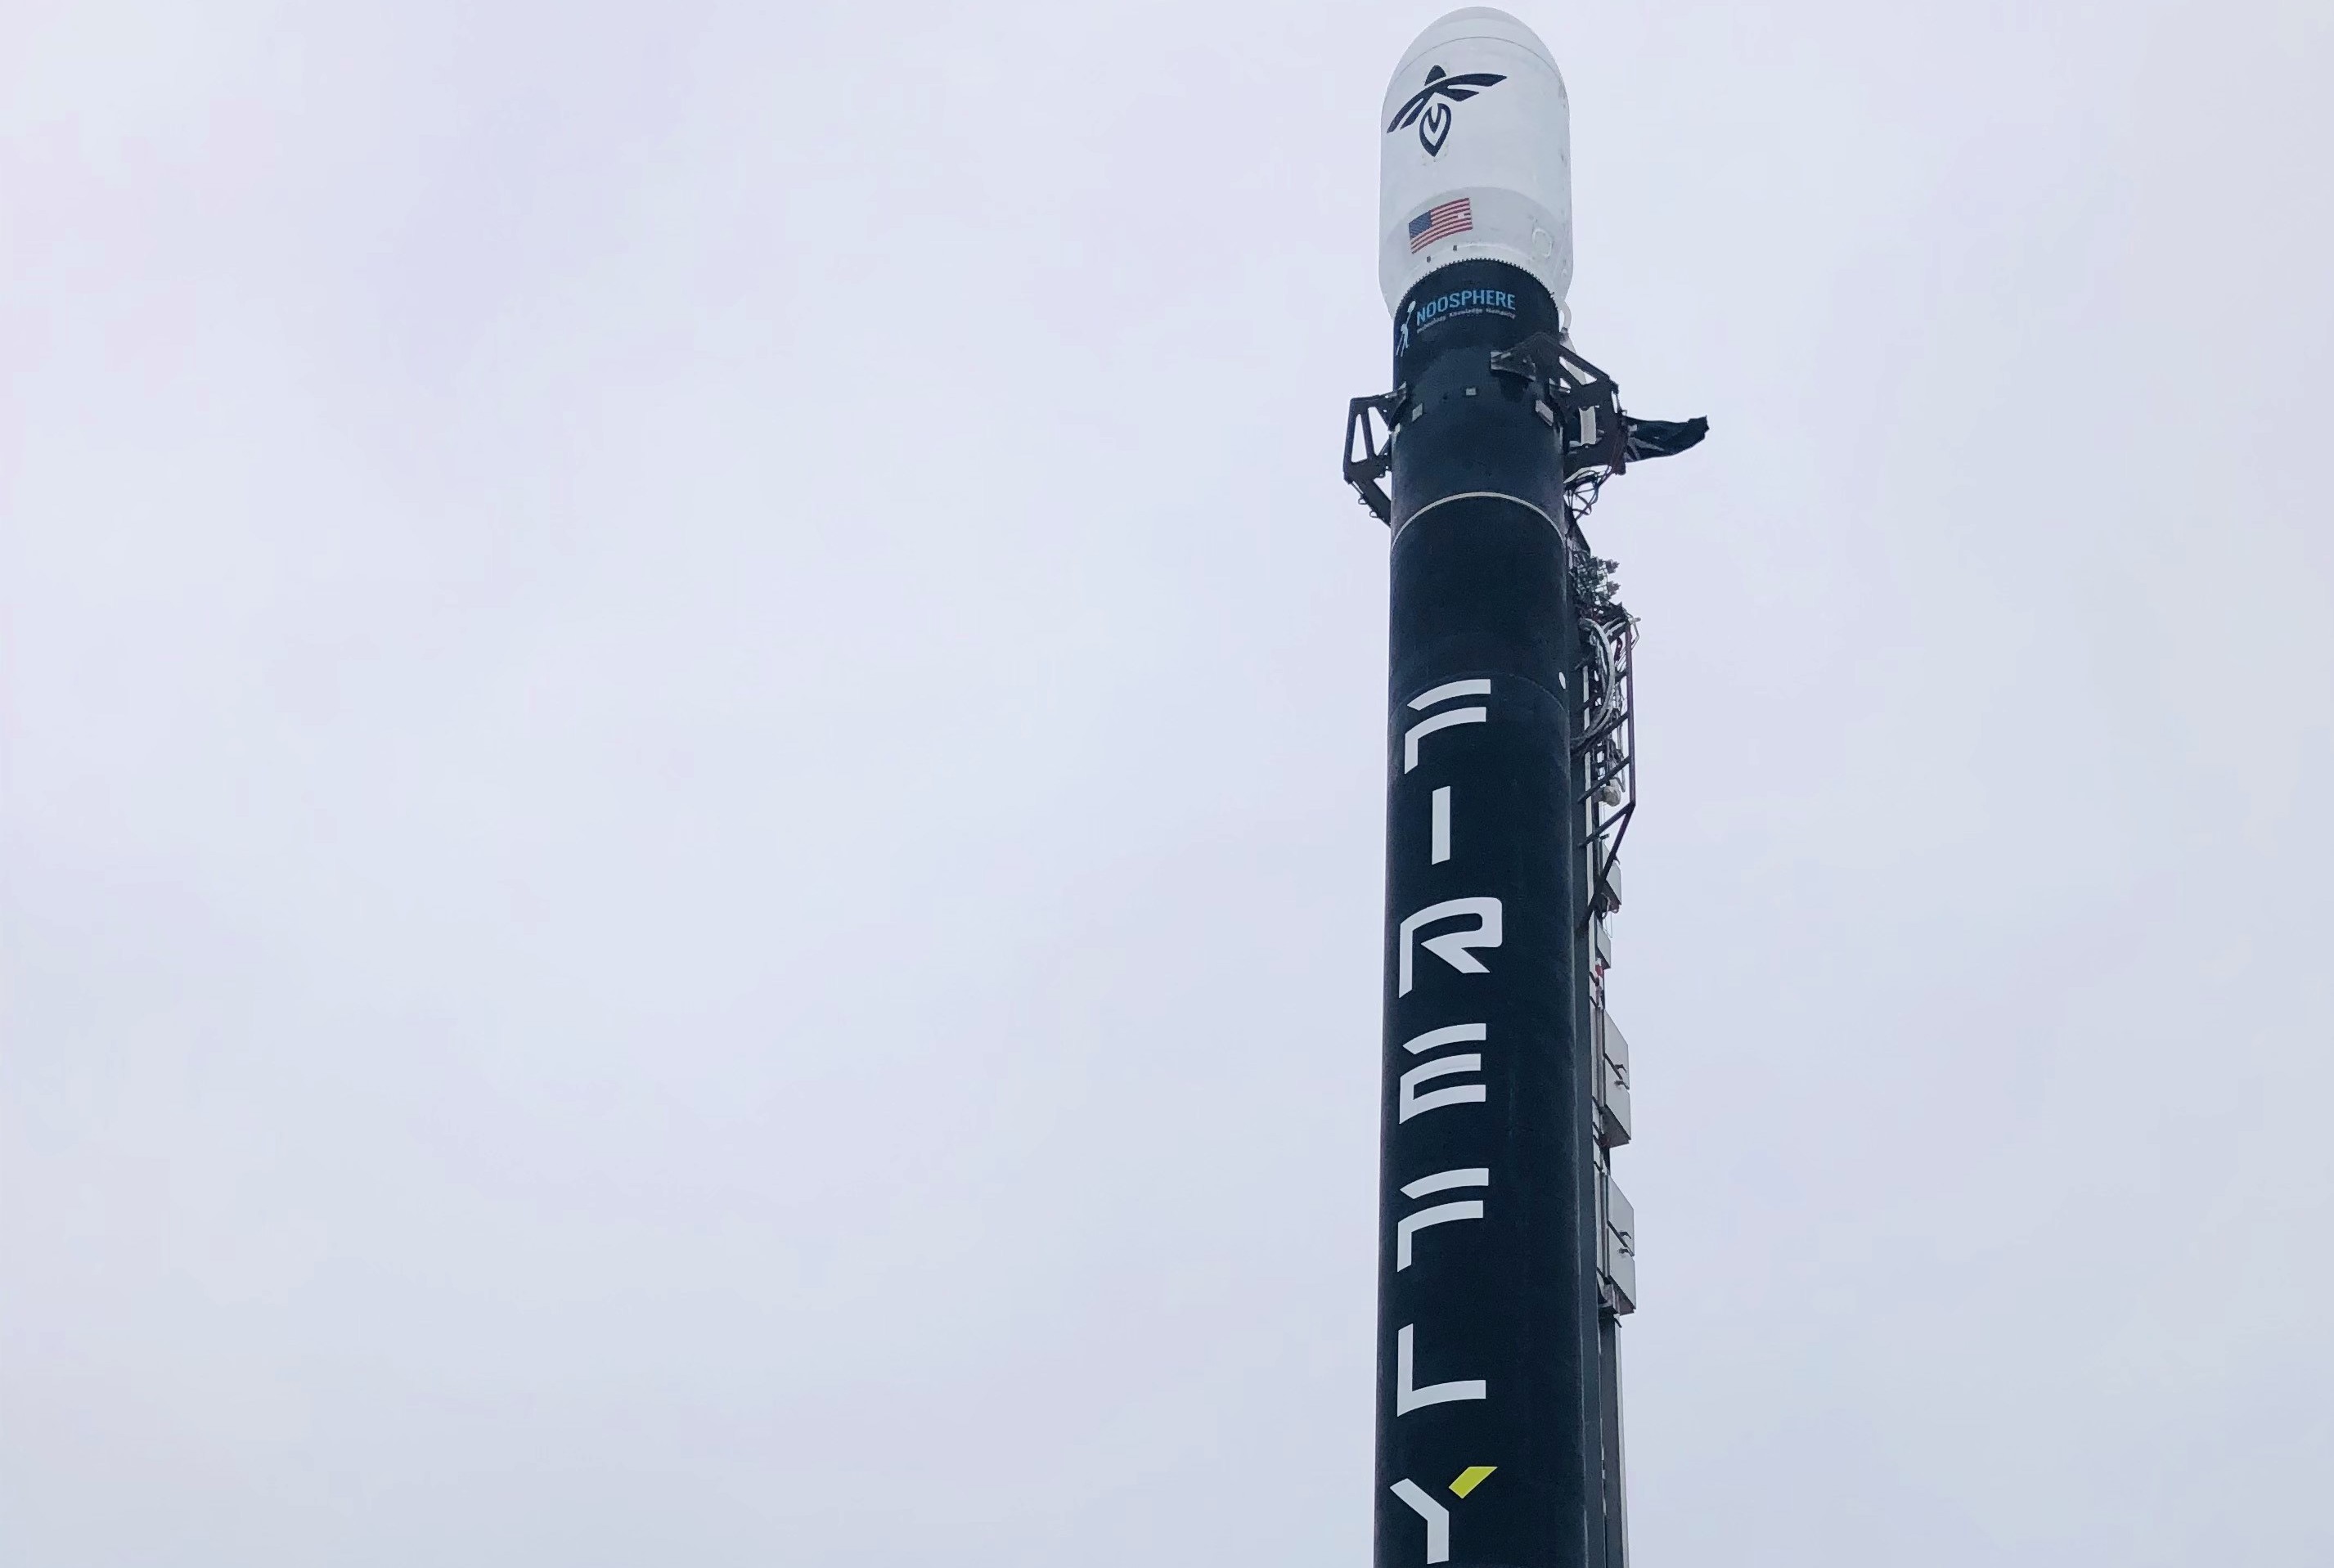 Firefly's Alpha launch vehicle